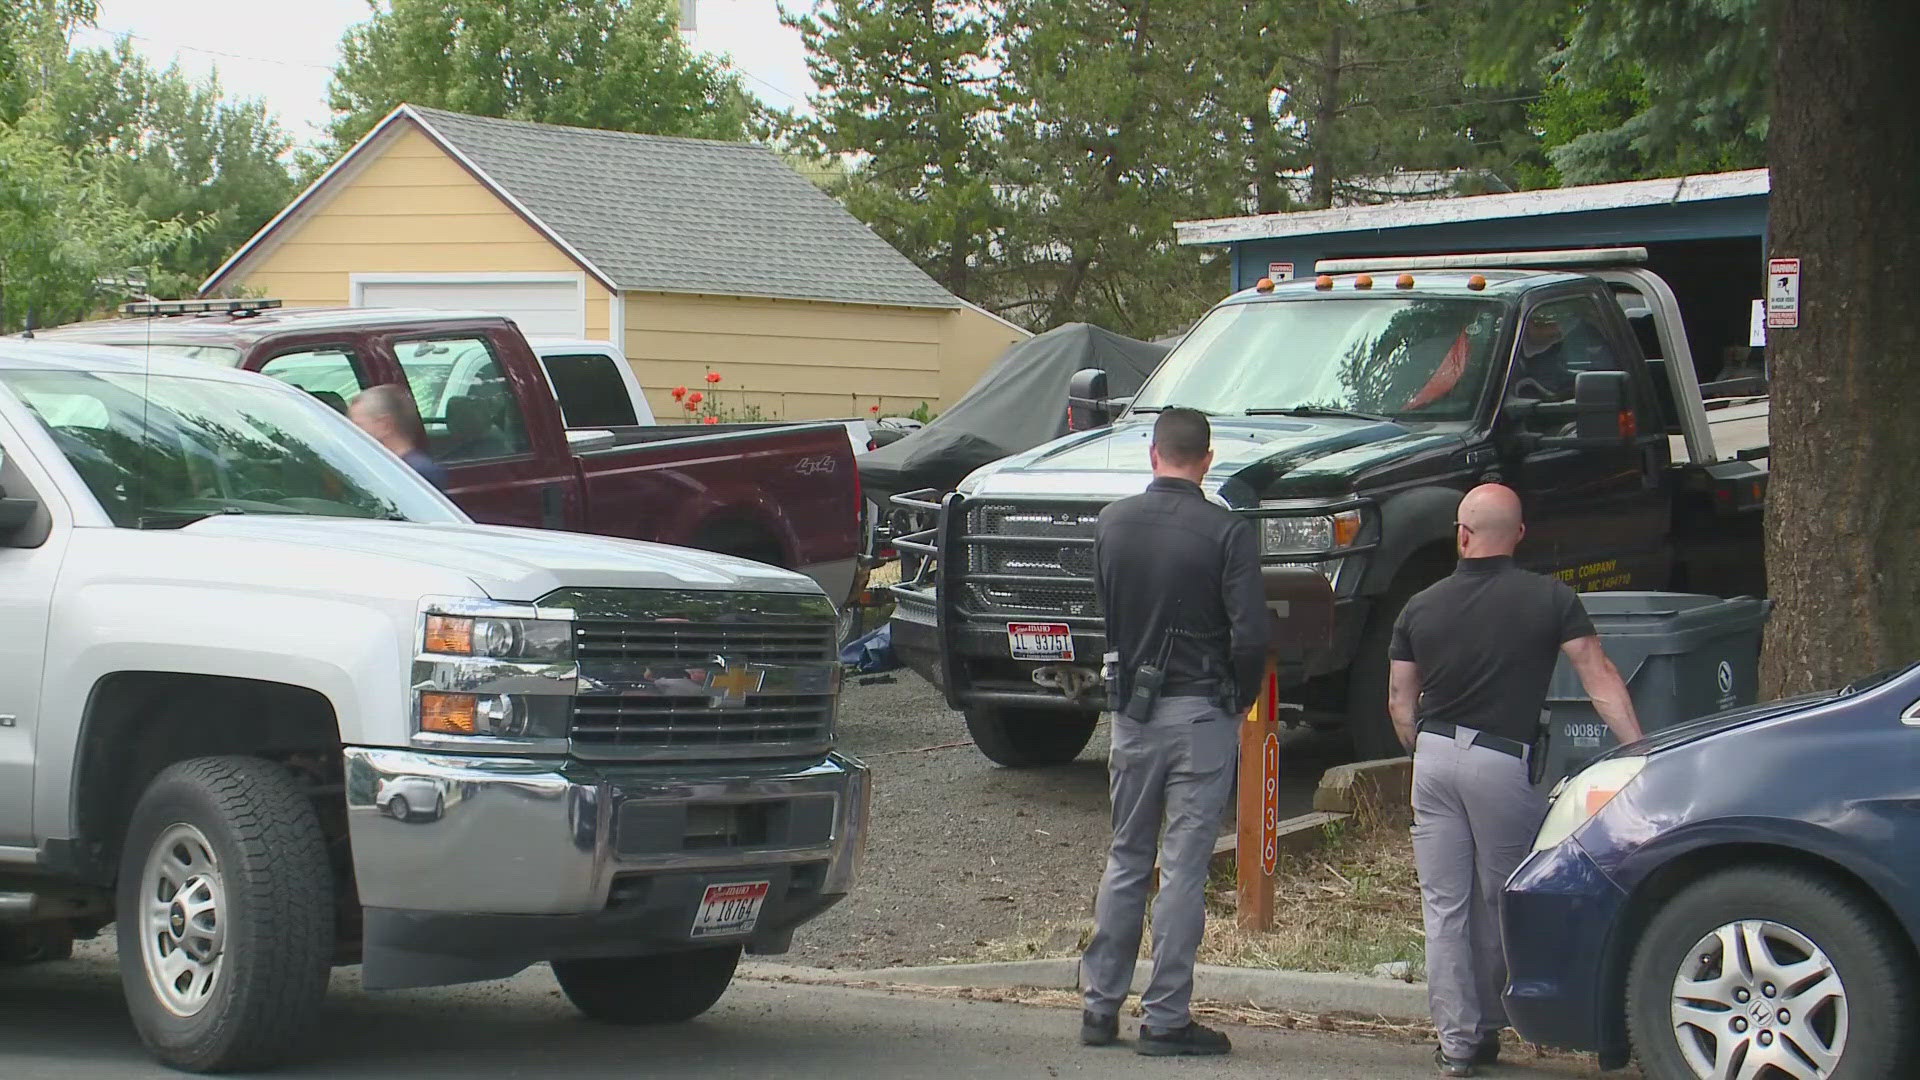 According to the Pullman Police Department, the search warrant was served at the family home of Aaron Aung in Moscow